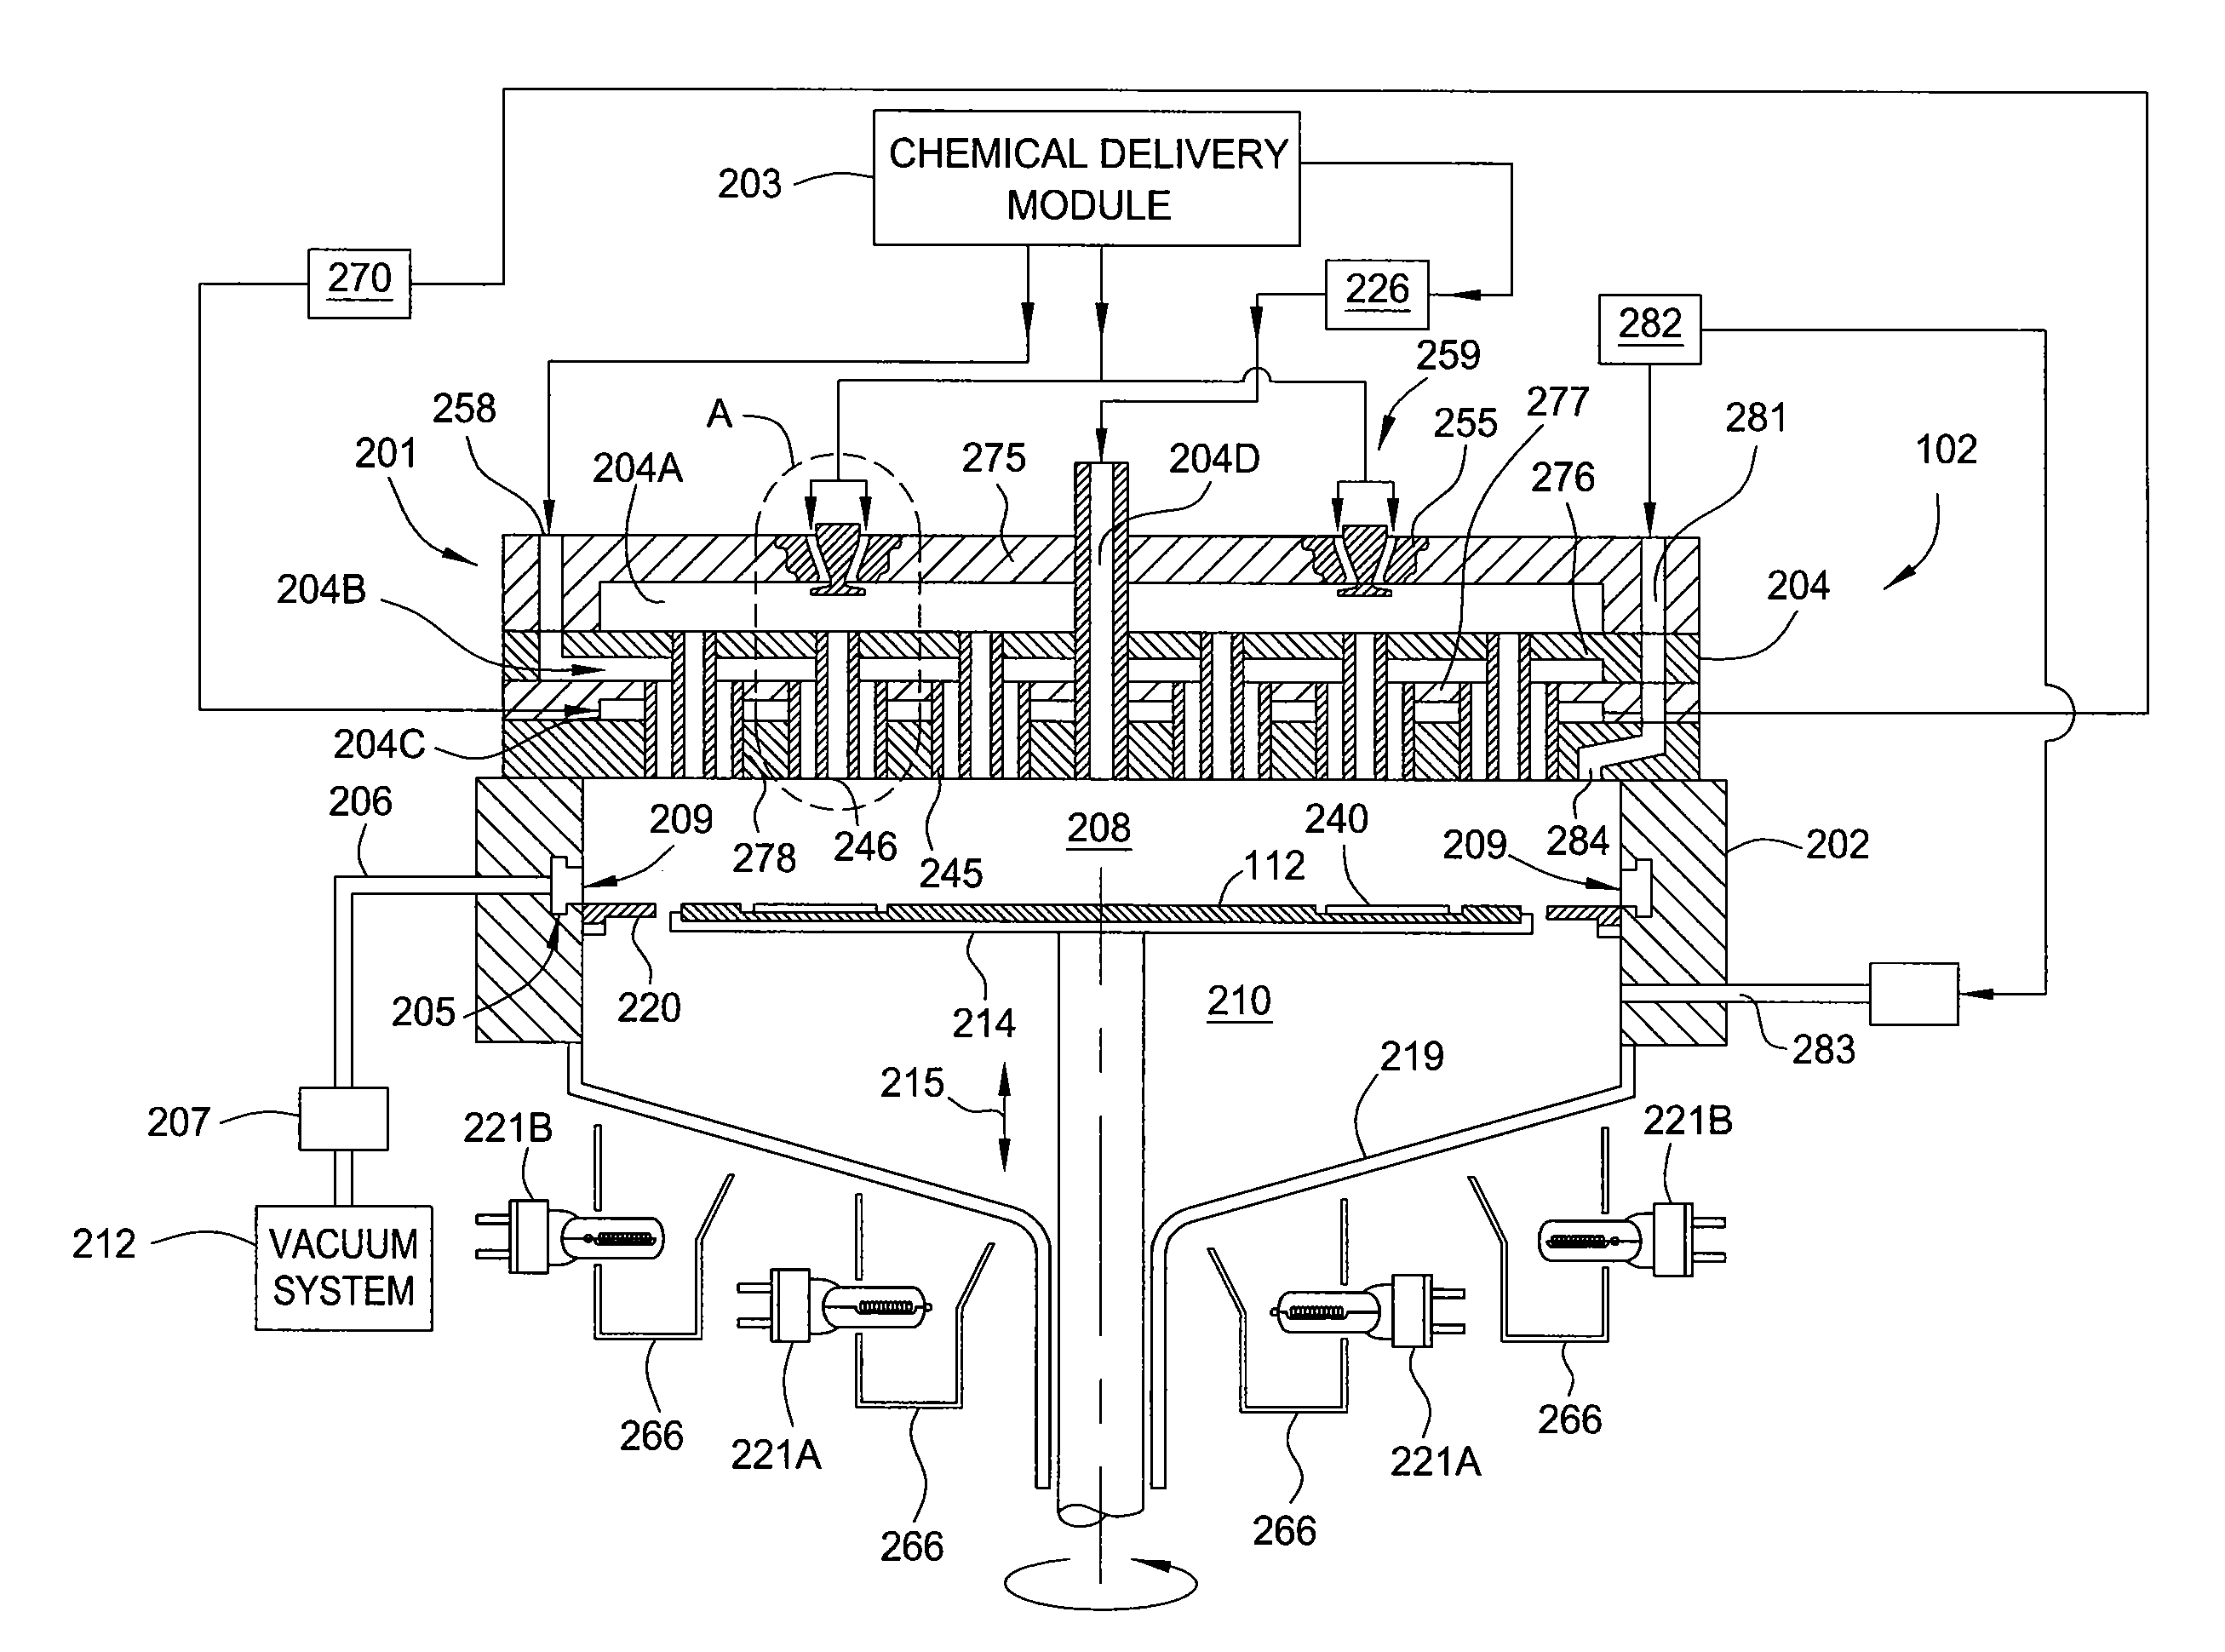 Showerhead assembly with gas injection distribution devices